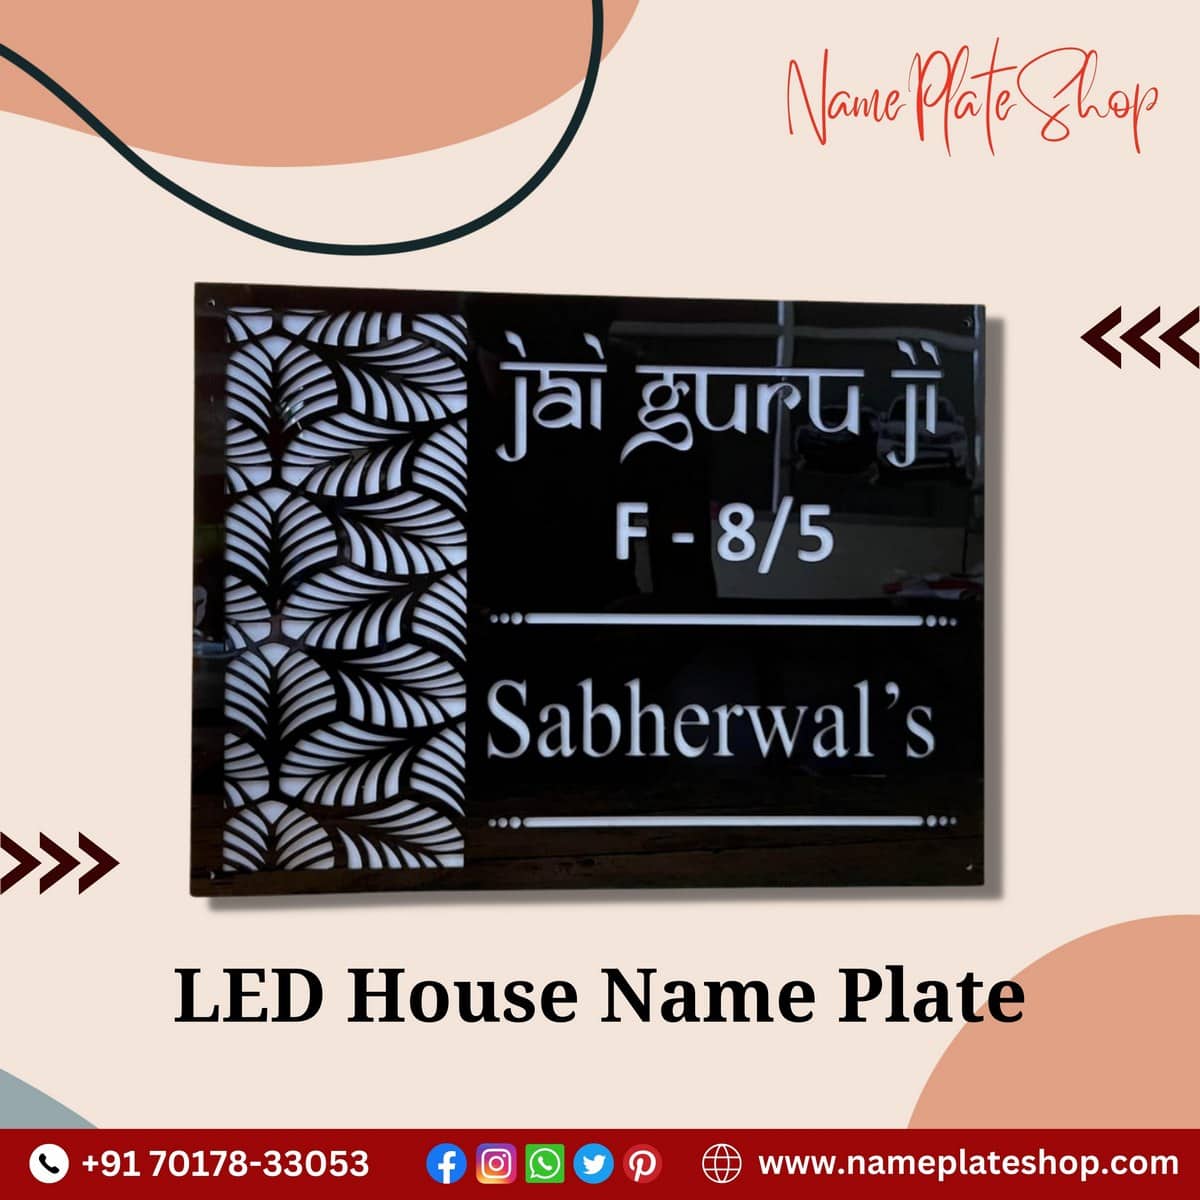 The LED House Nameplate Unique, Durable, Custamizable